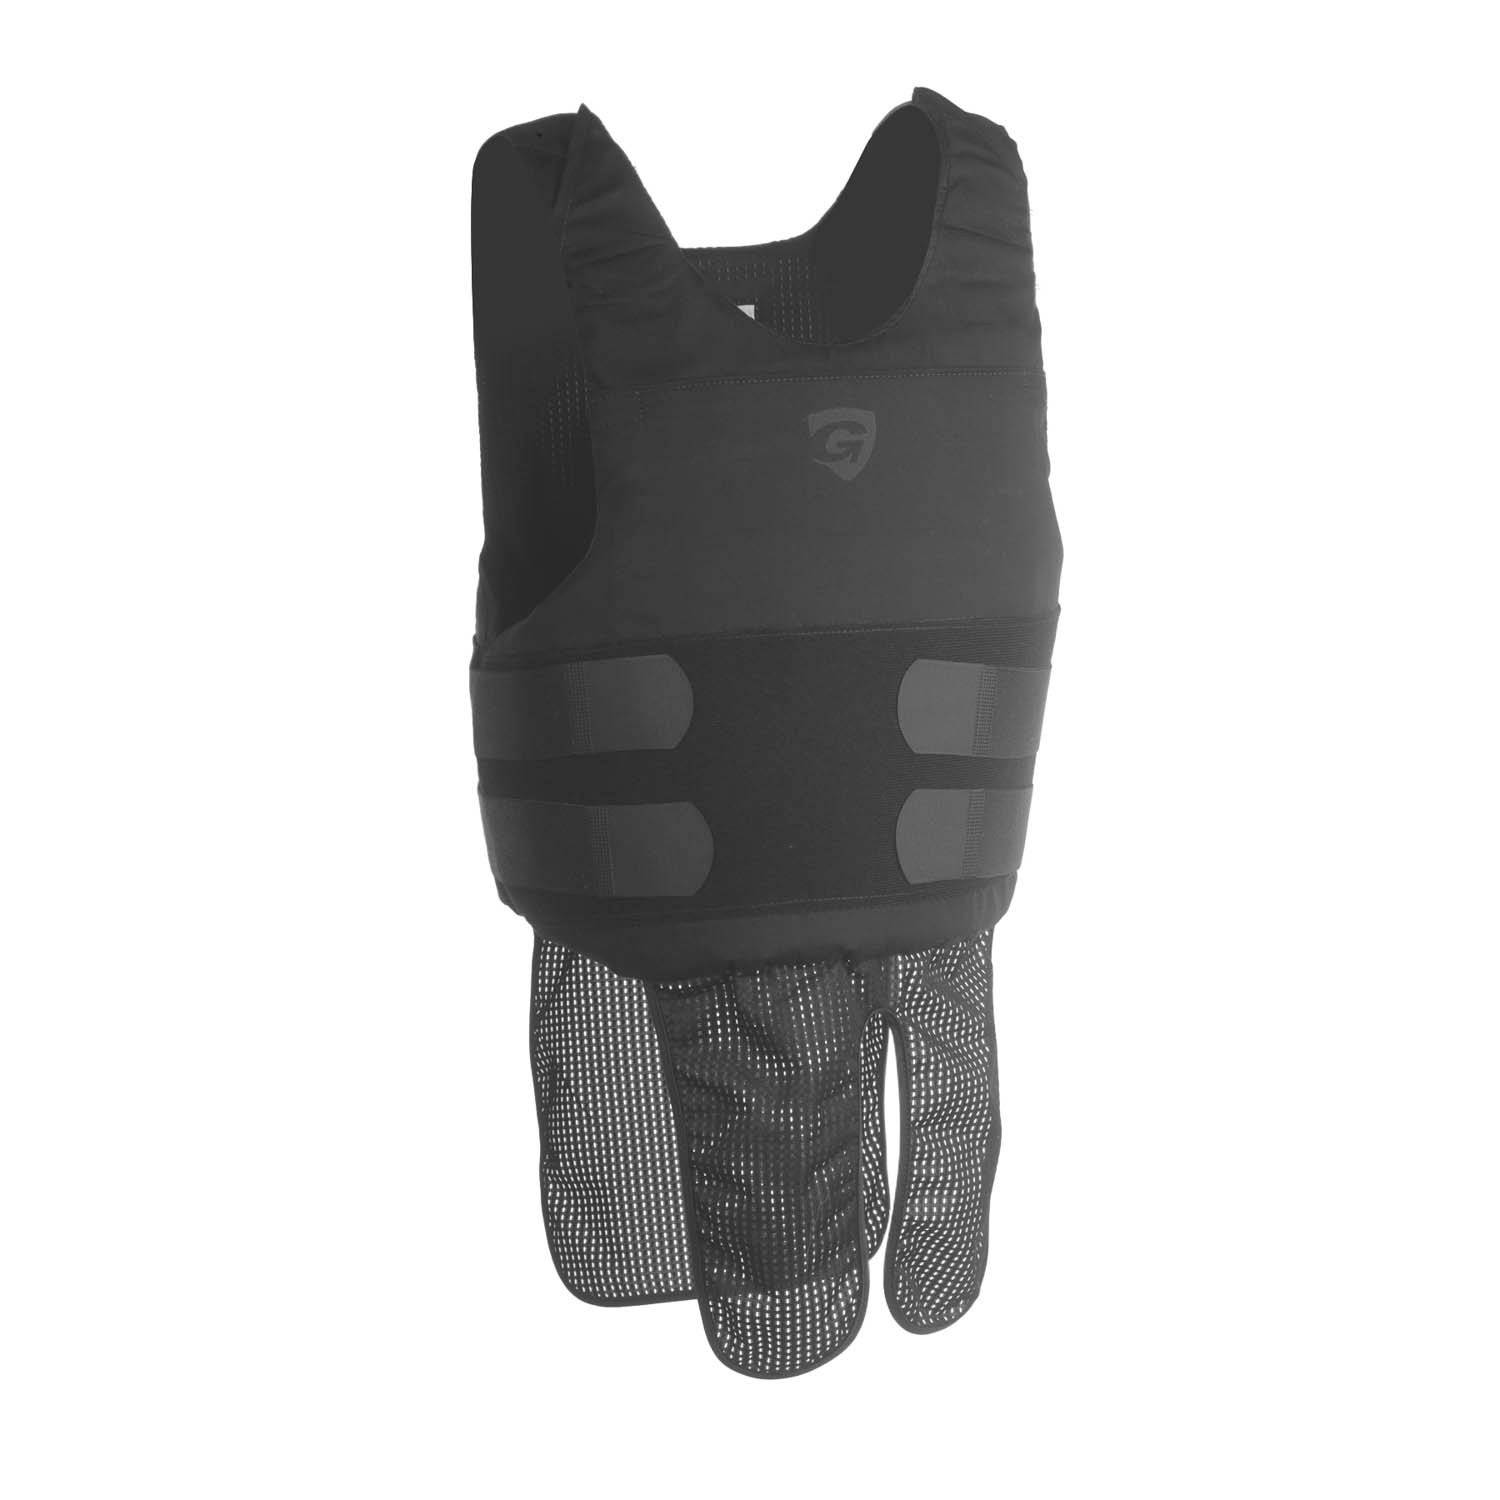 Women's Chest Protector (3 Piece) - 0417 946 882 enrol today